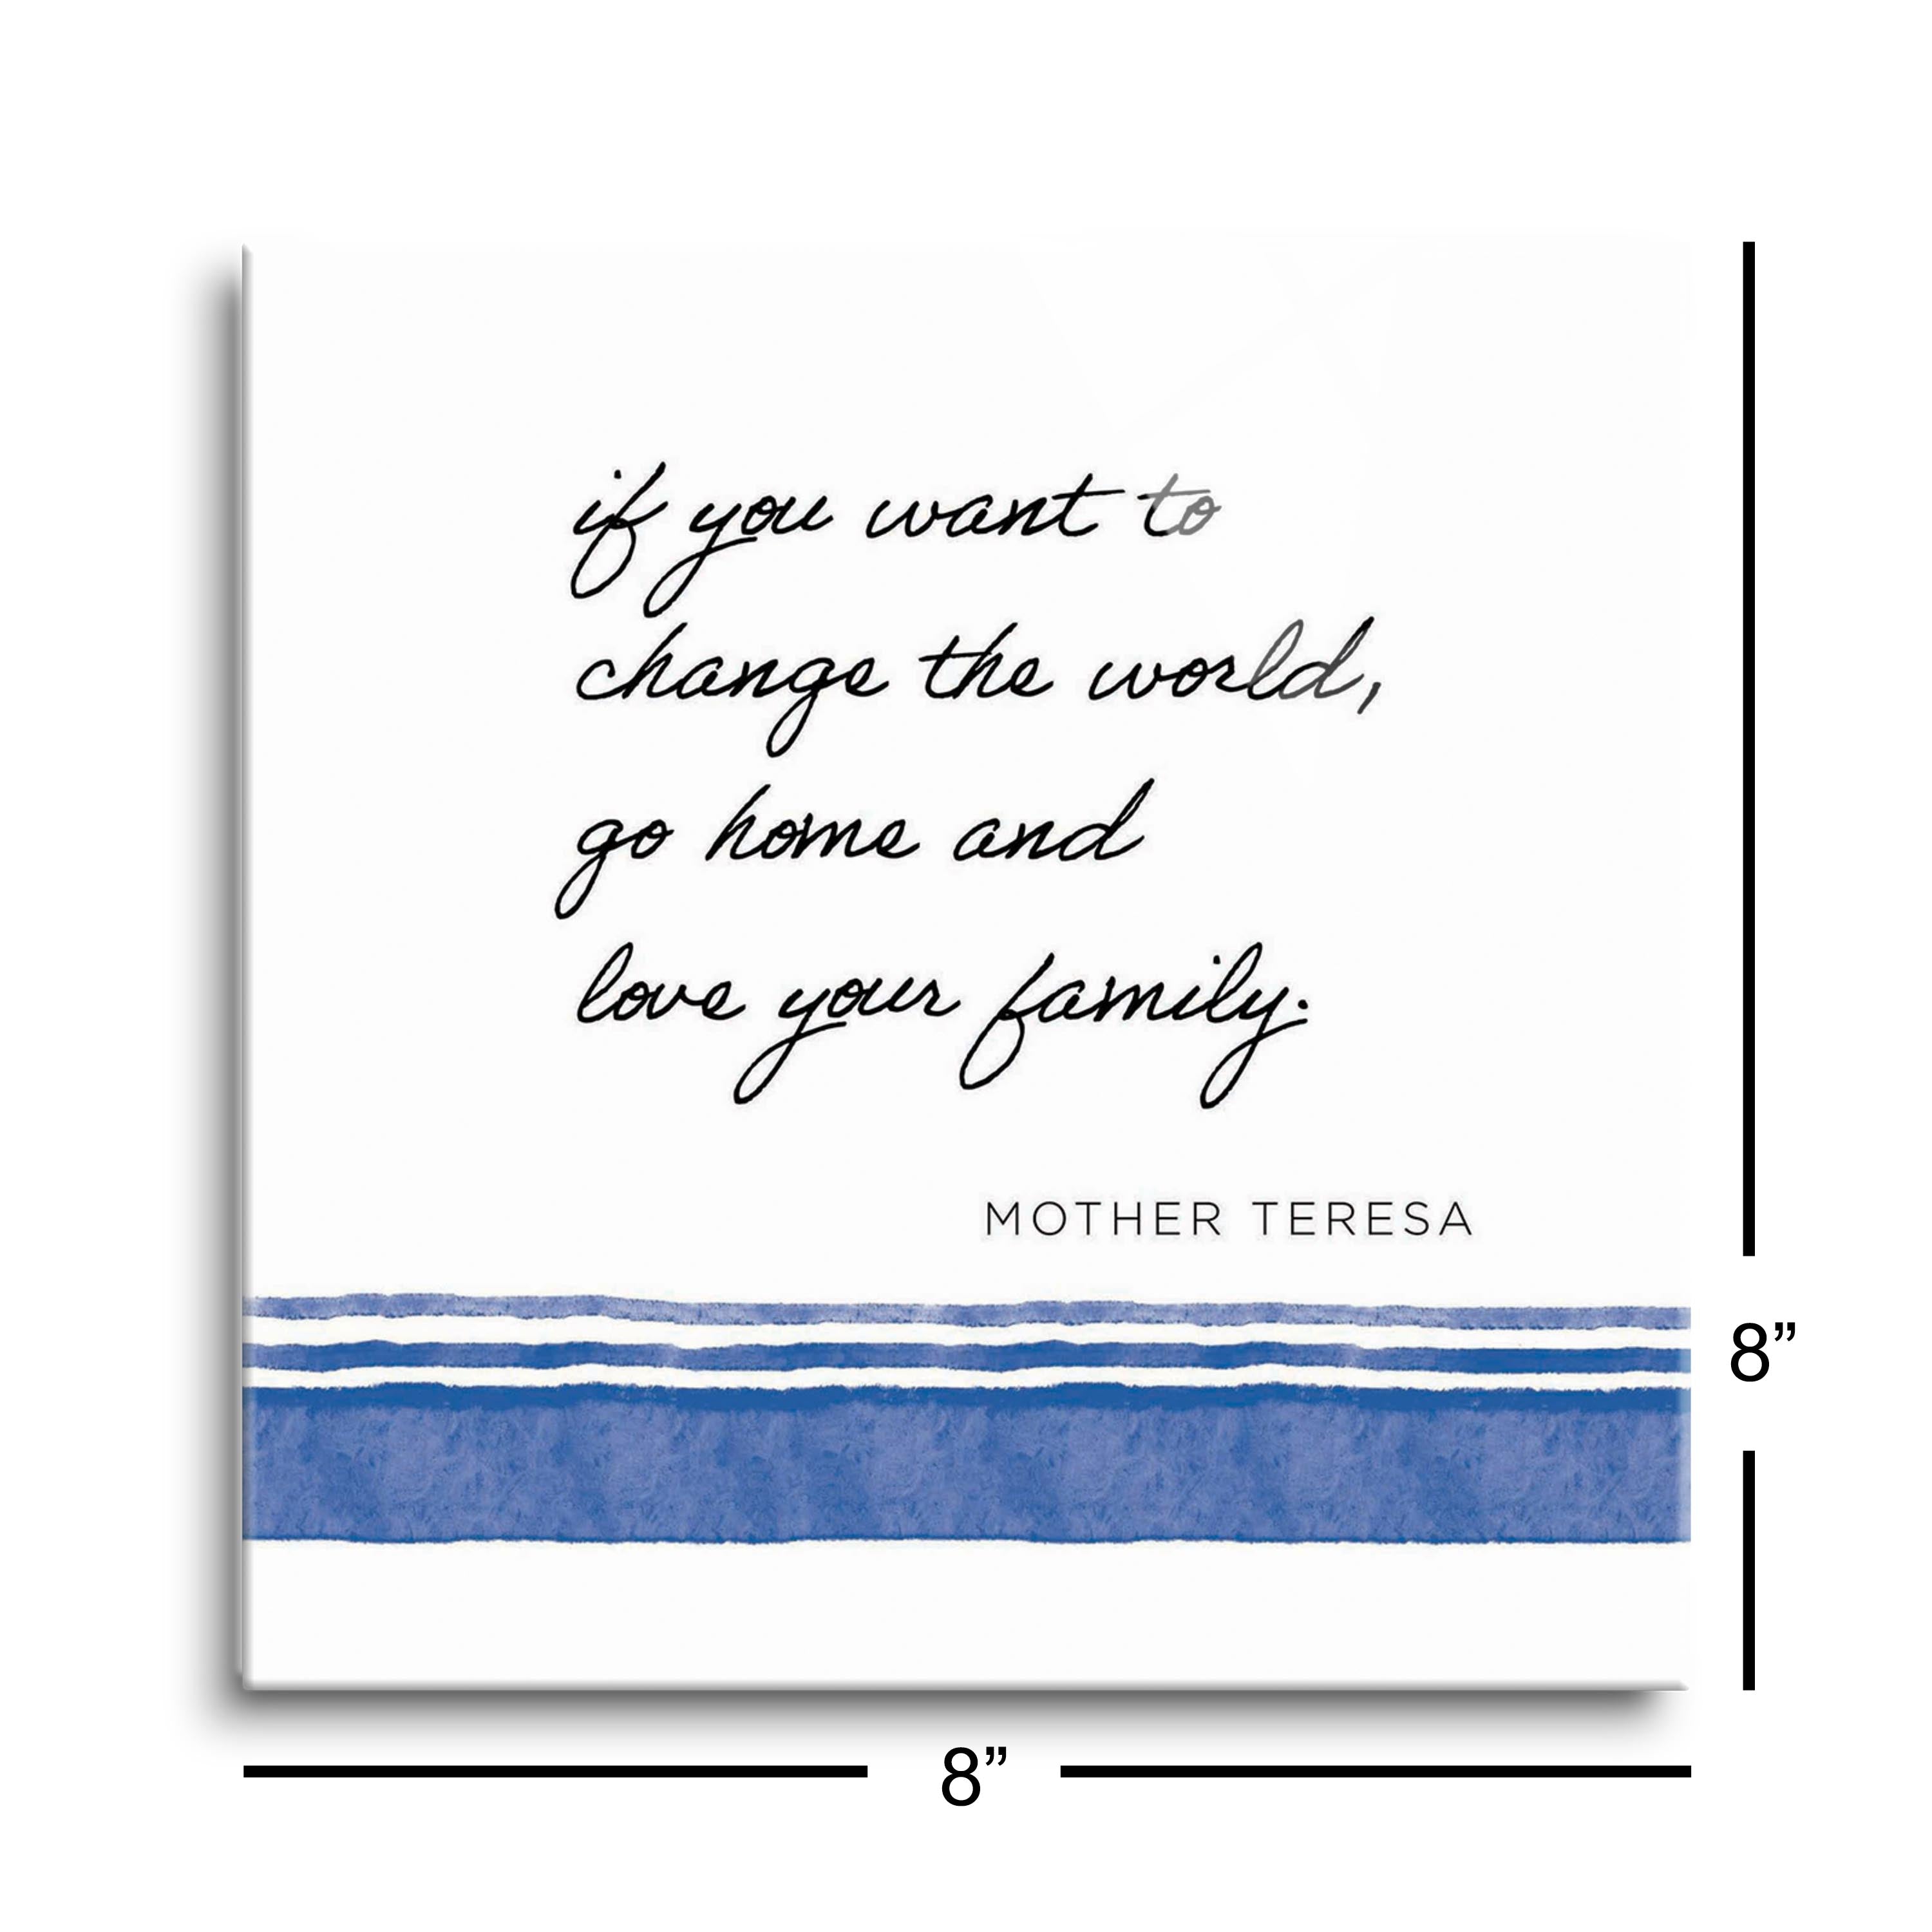 Love Your Family Square Glass Plaque-8"x8"